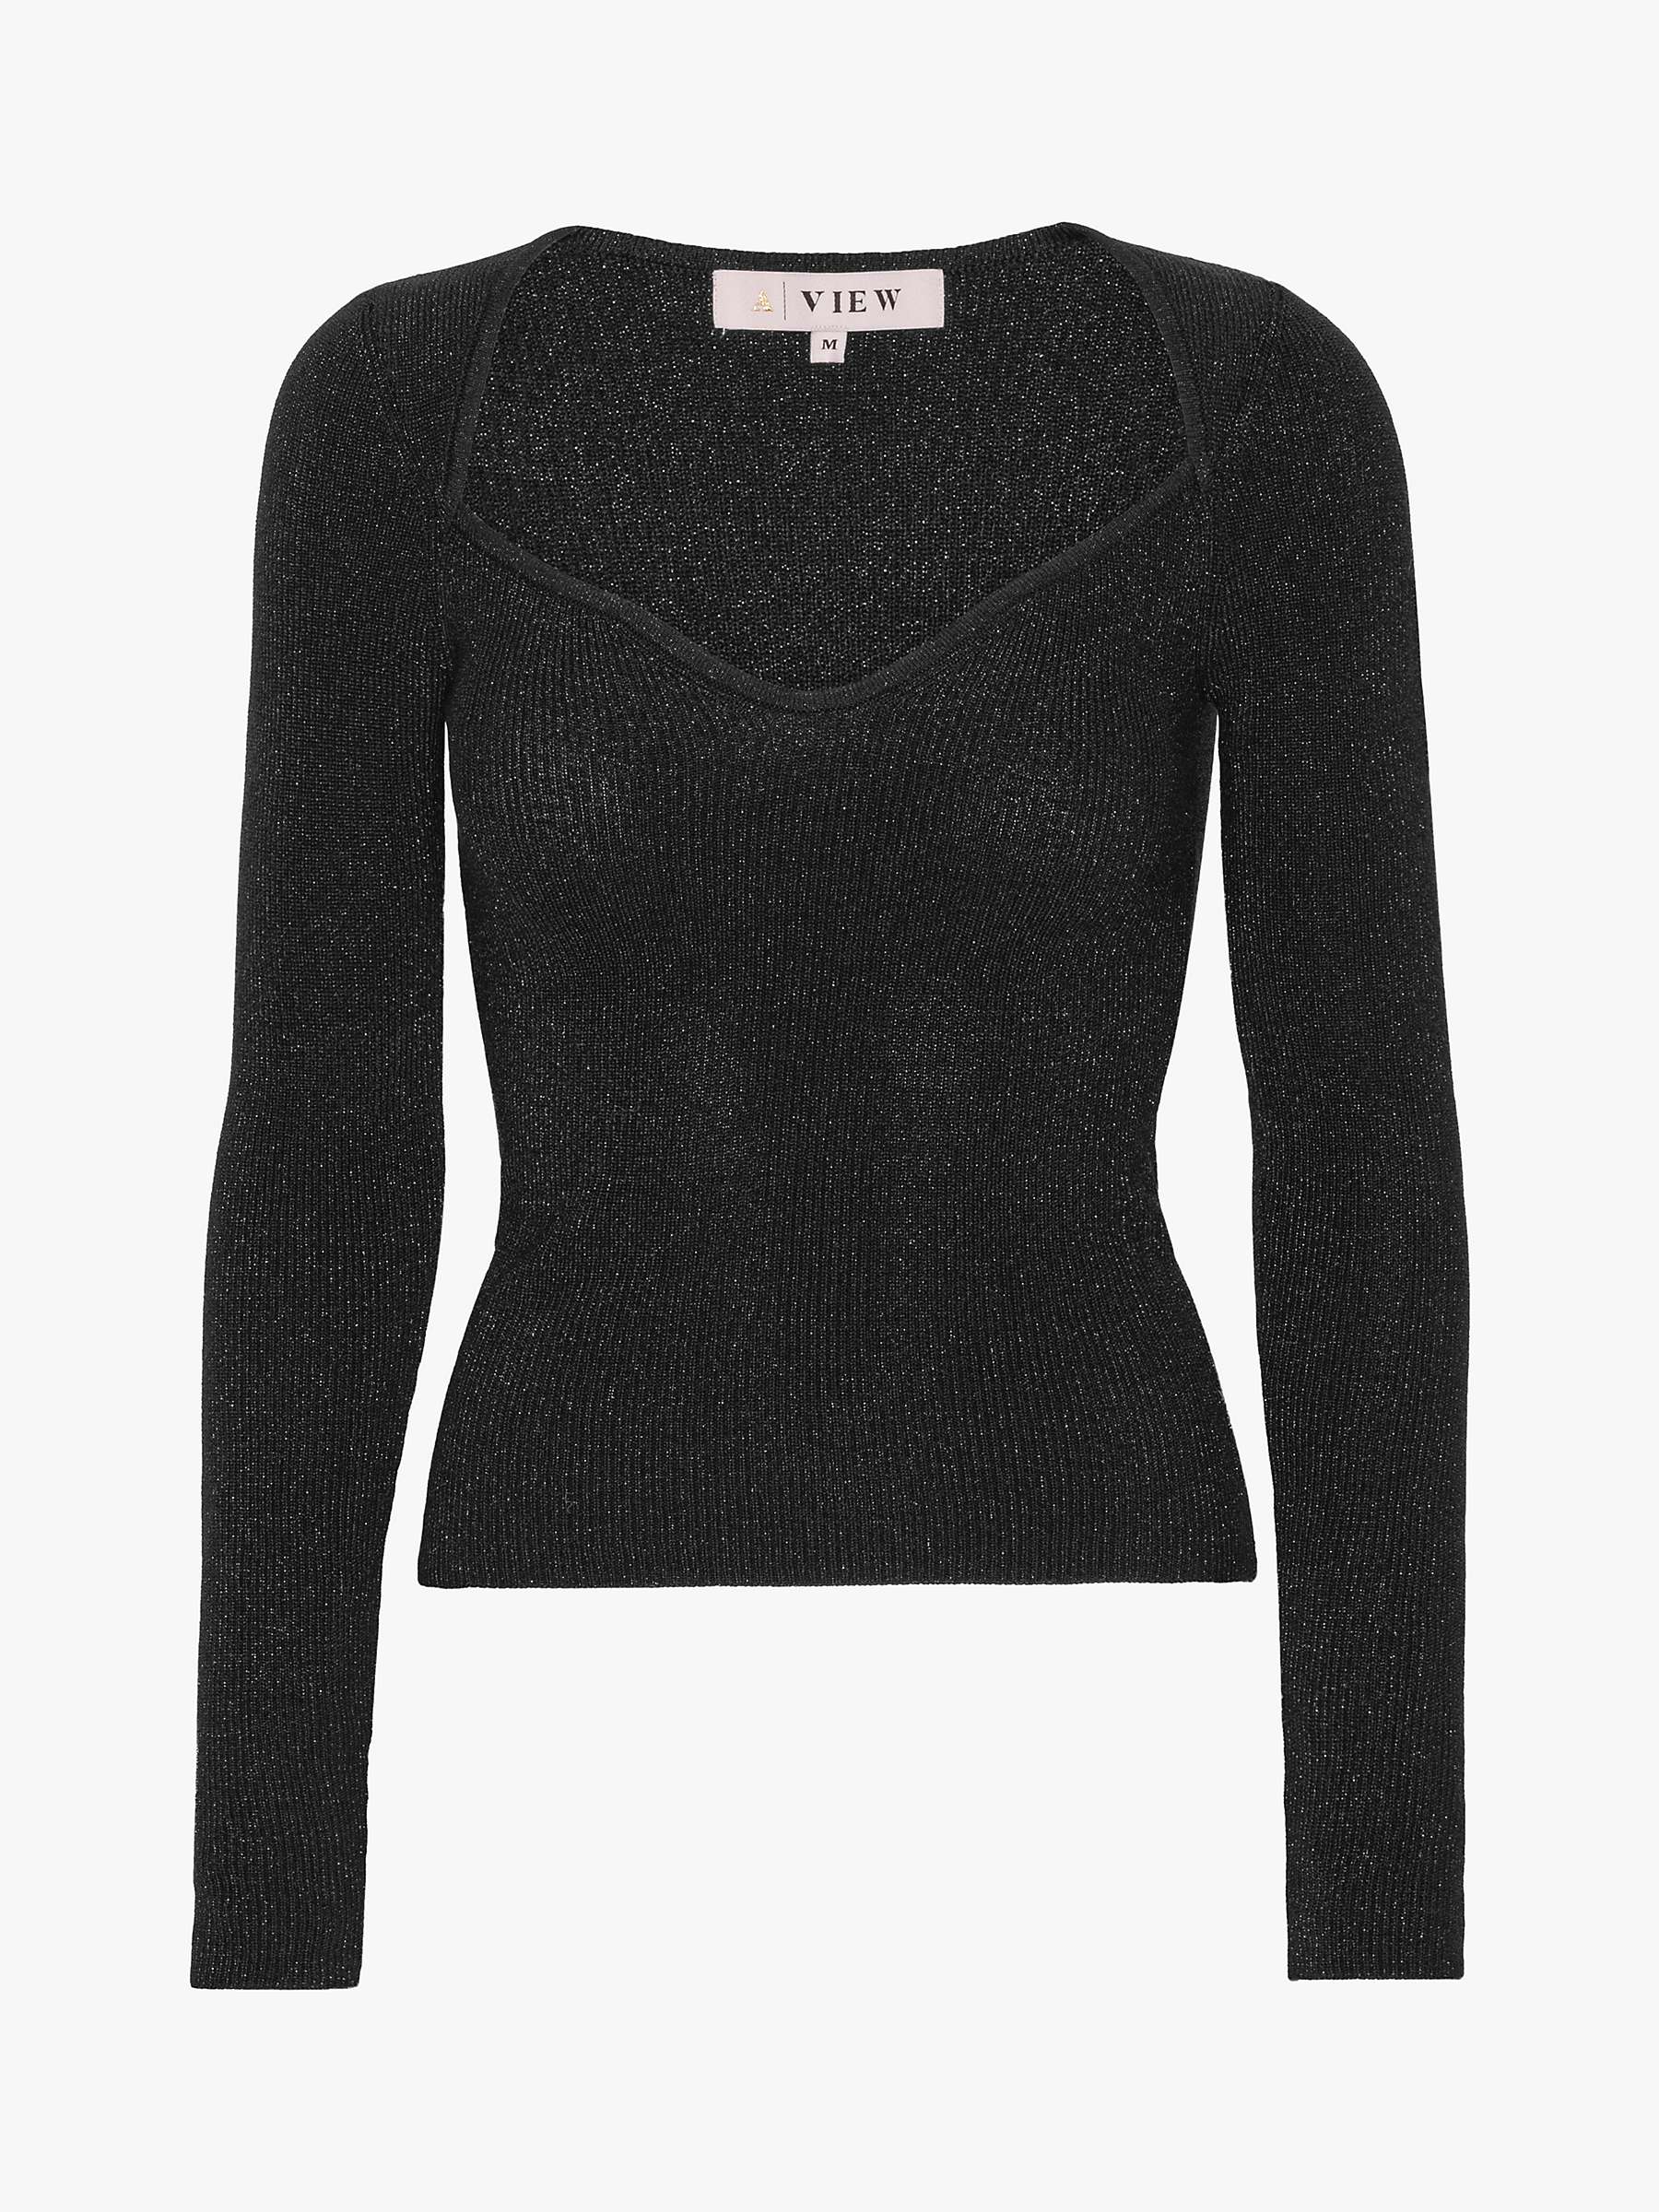 Buy A-VIEW Alexandra Glitter Knitted Top, Black Online at johnlewis.com